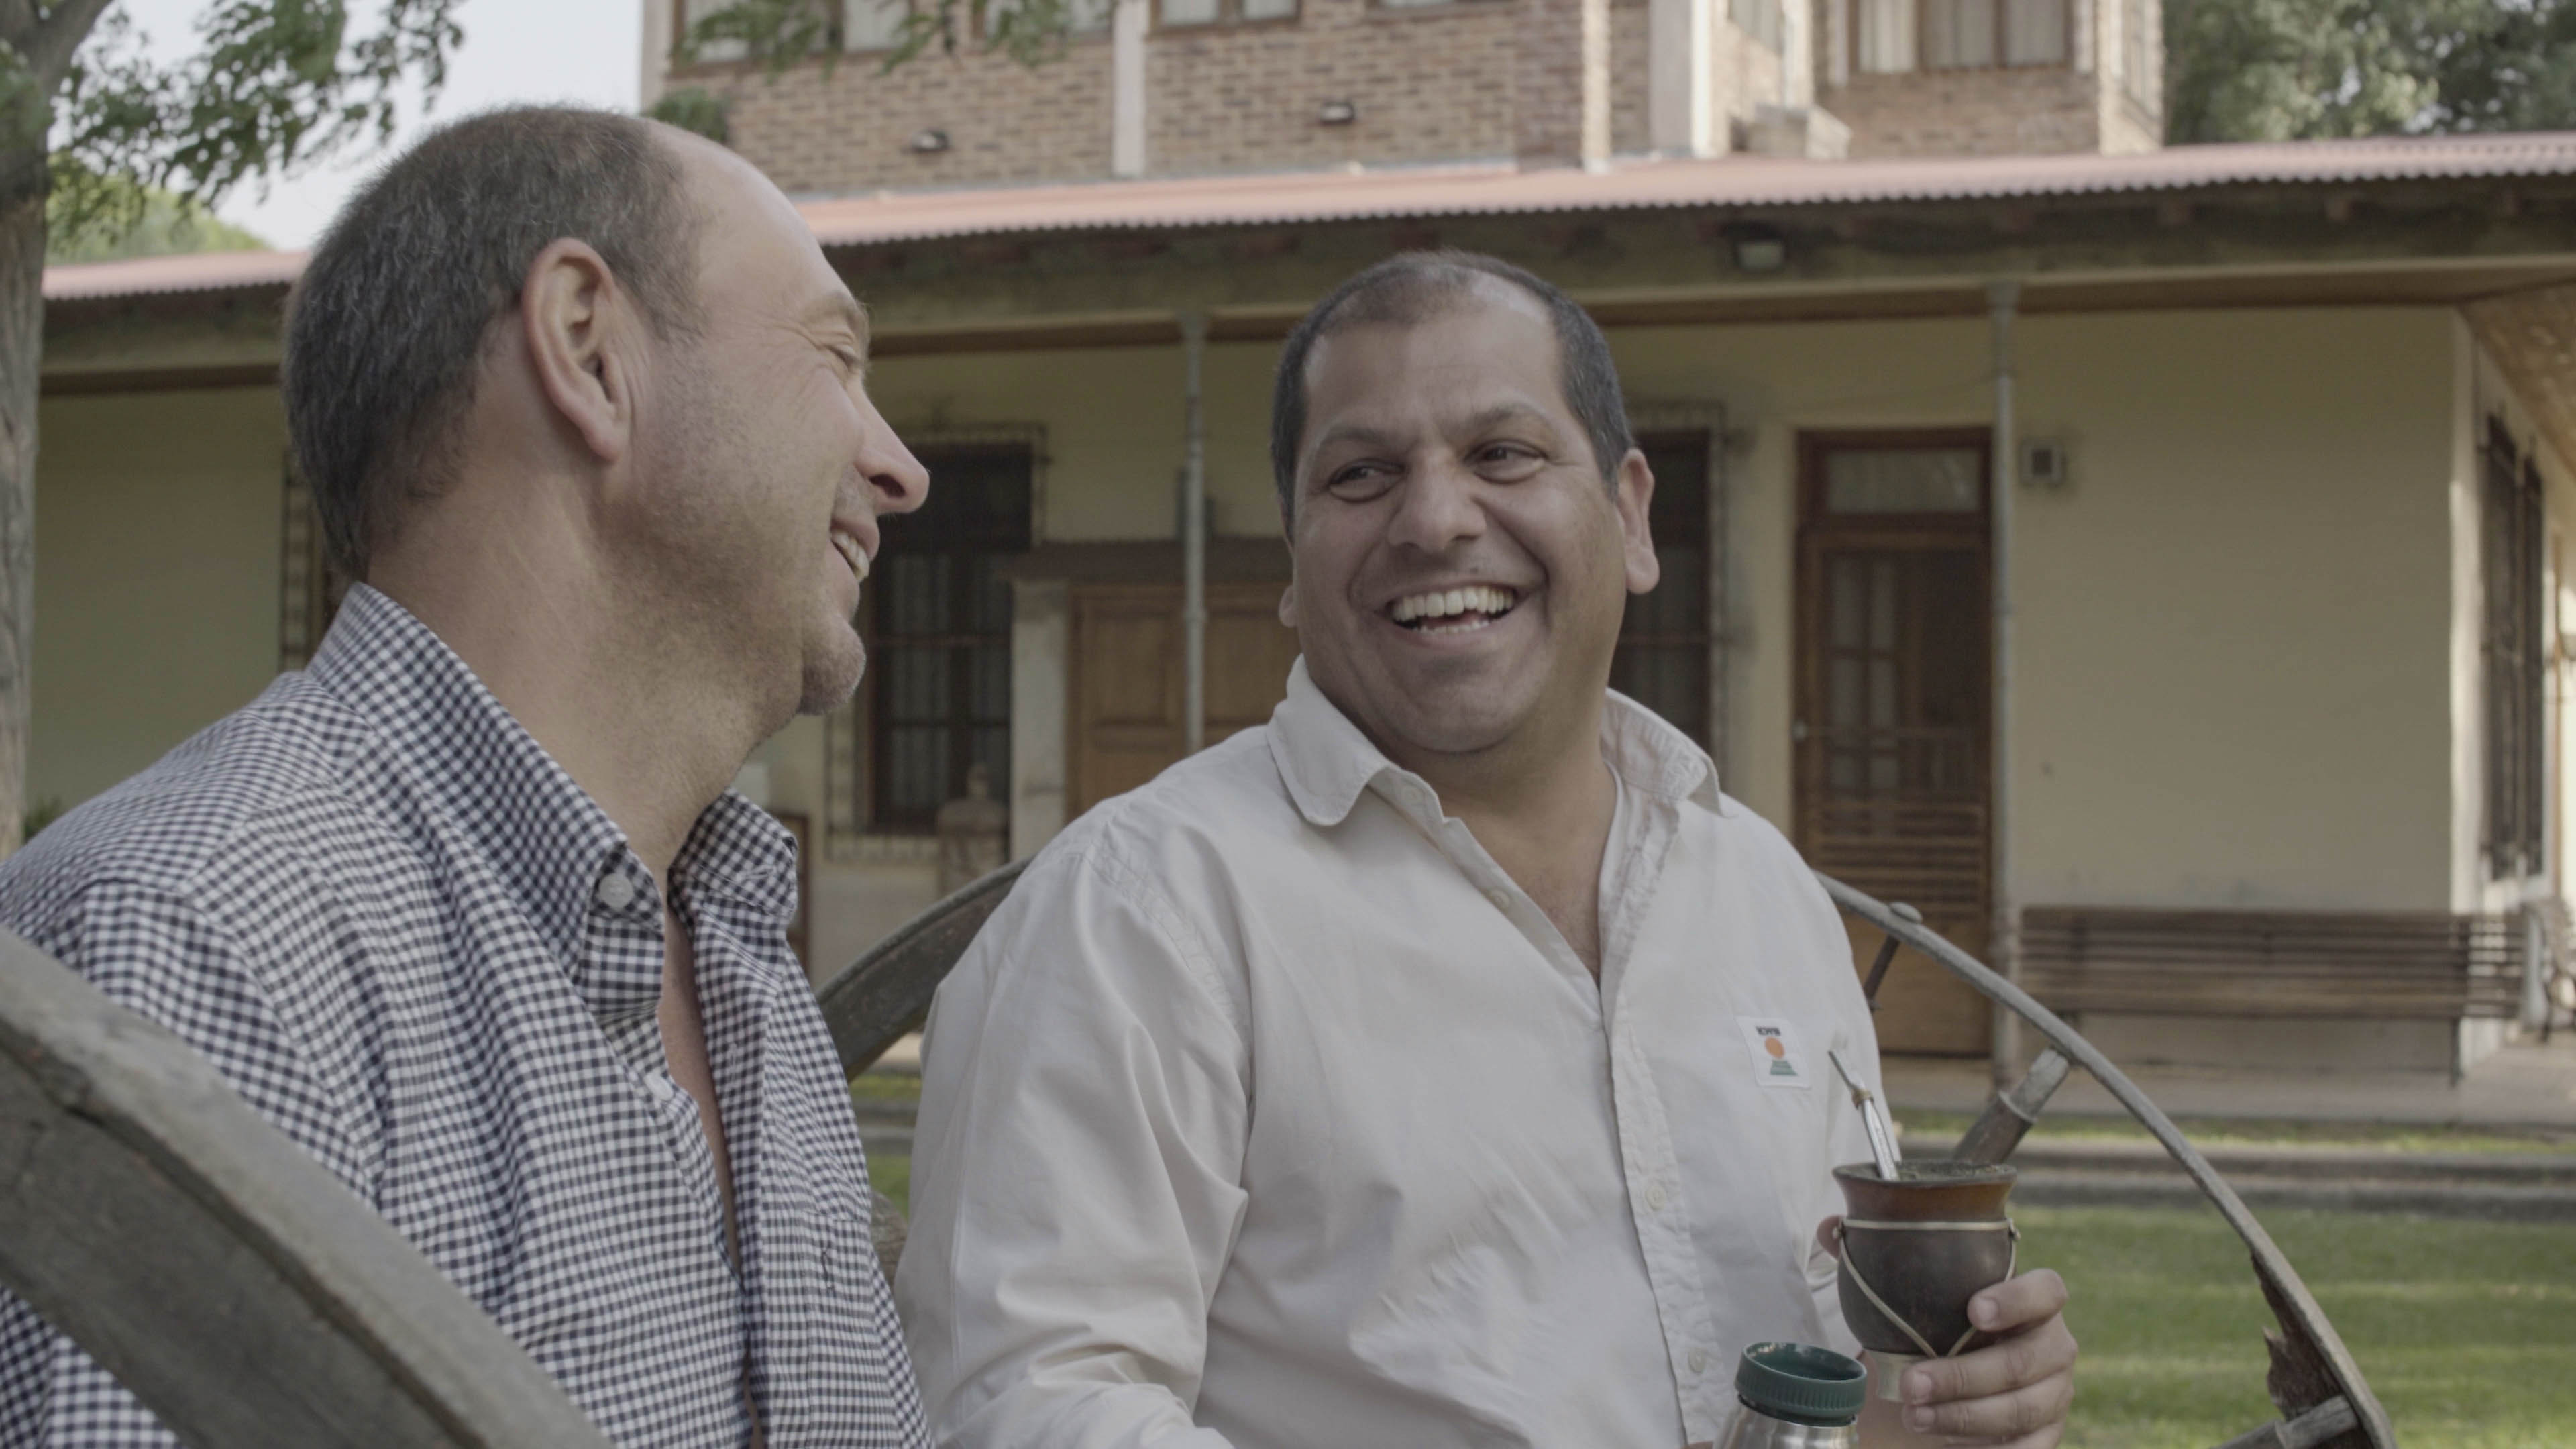 Farmer Luís Parra and KWS consultant Alfonso Caligari sit on a bench together, laughing and enjoying a cup of maté tea.